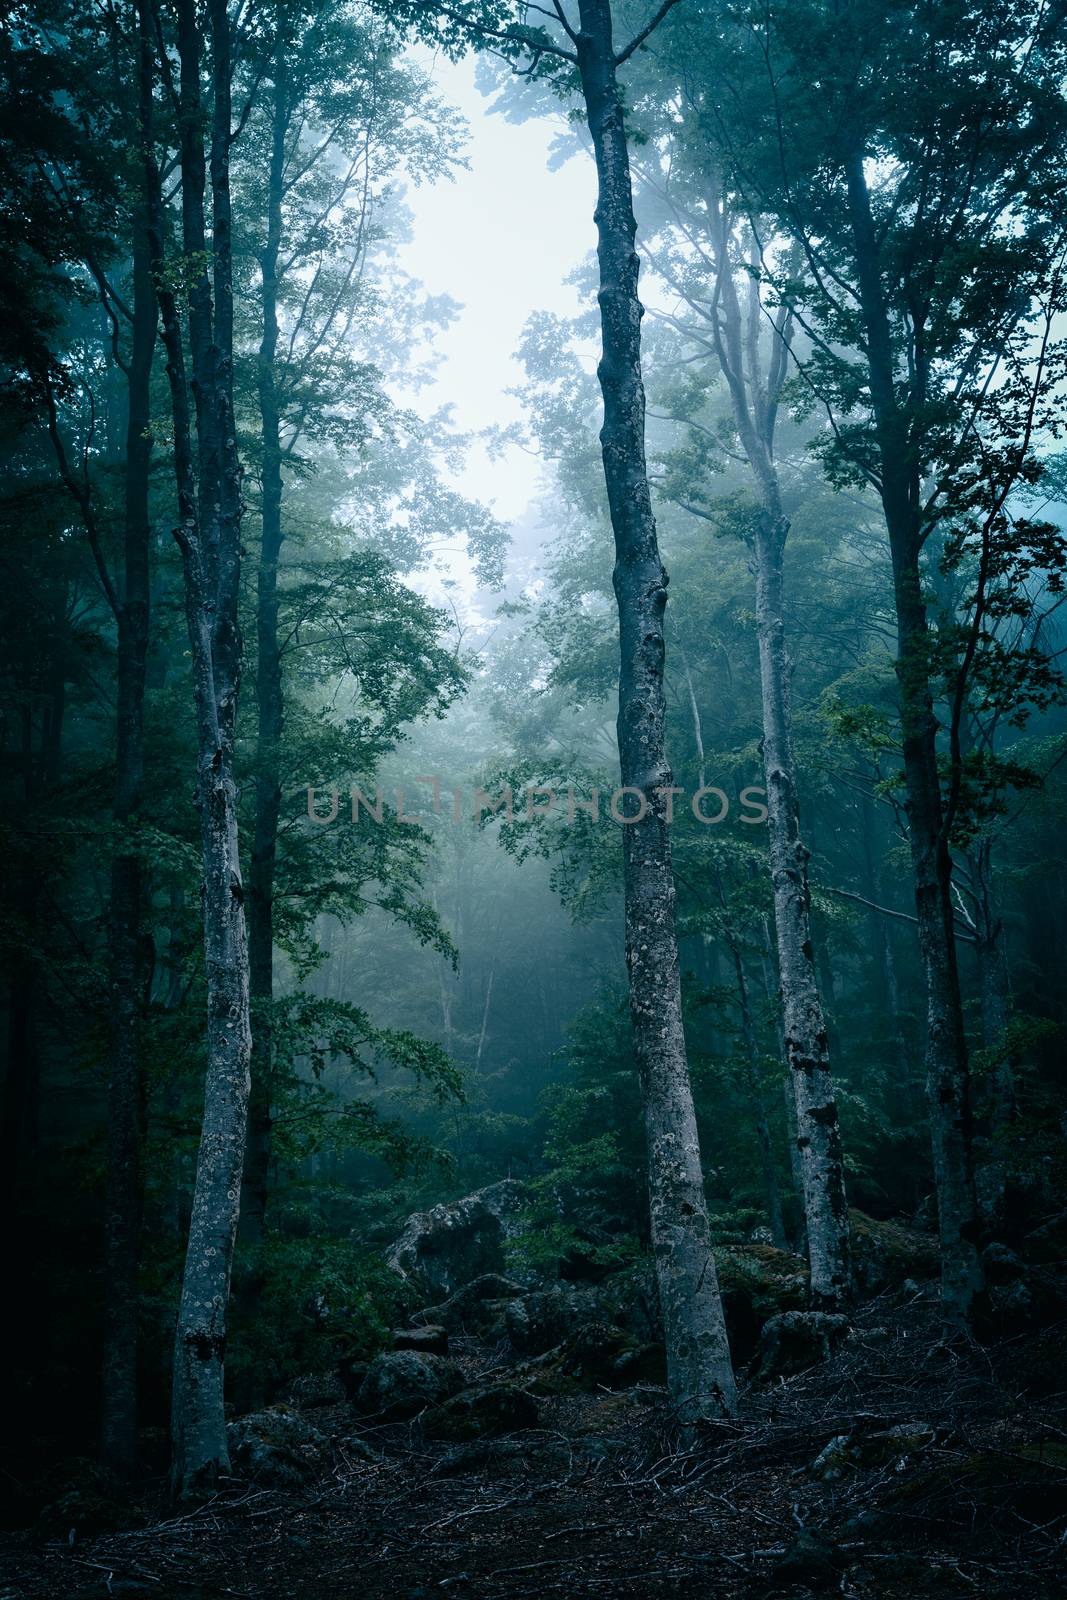 Dark forest with fog in ghostly appearance